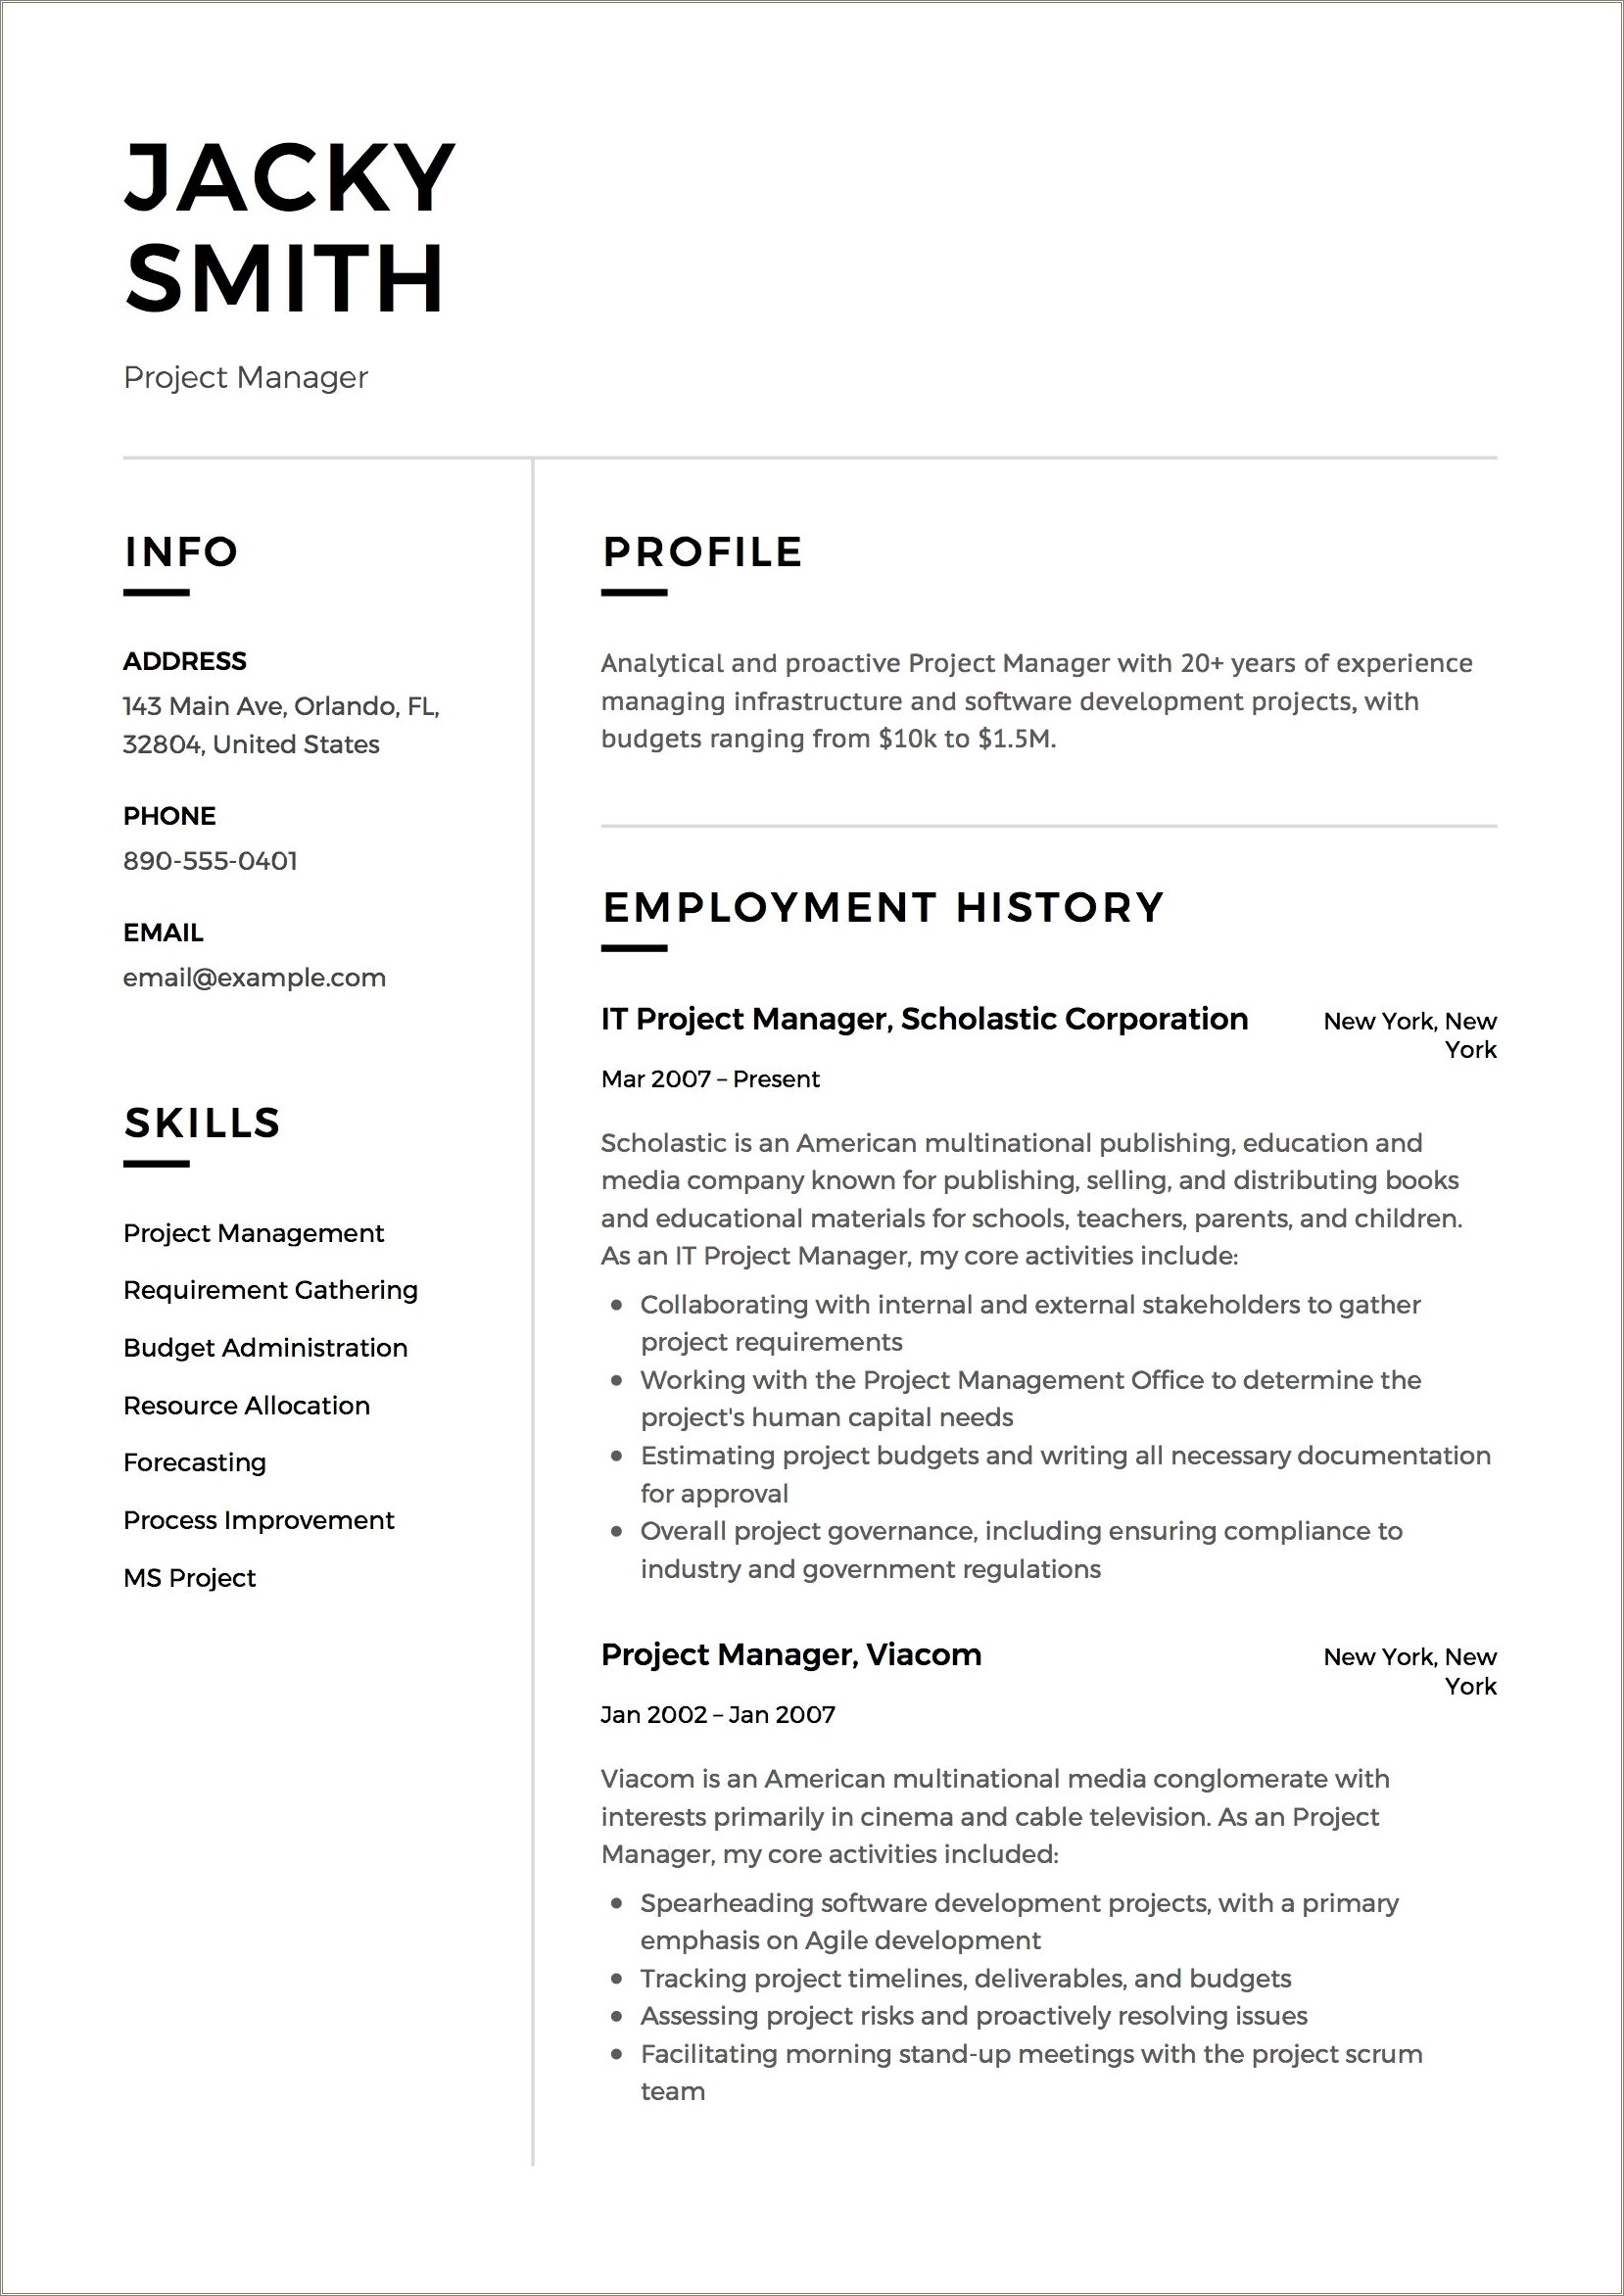 Examples Of Impact Statements For Resume